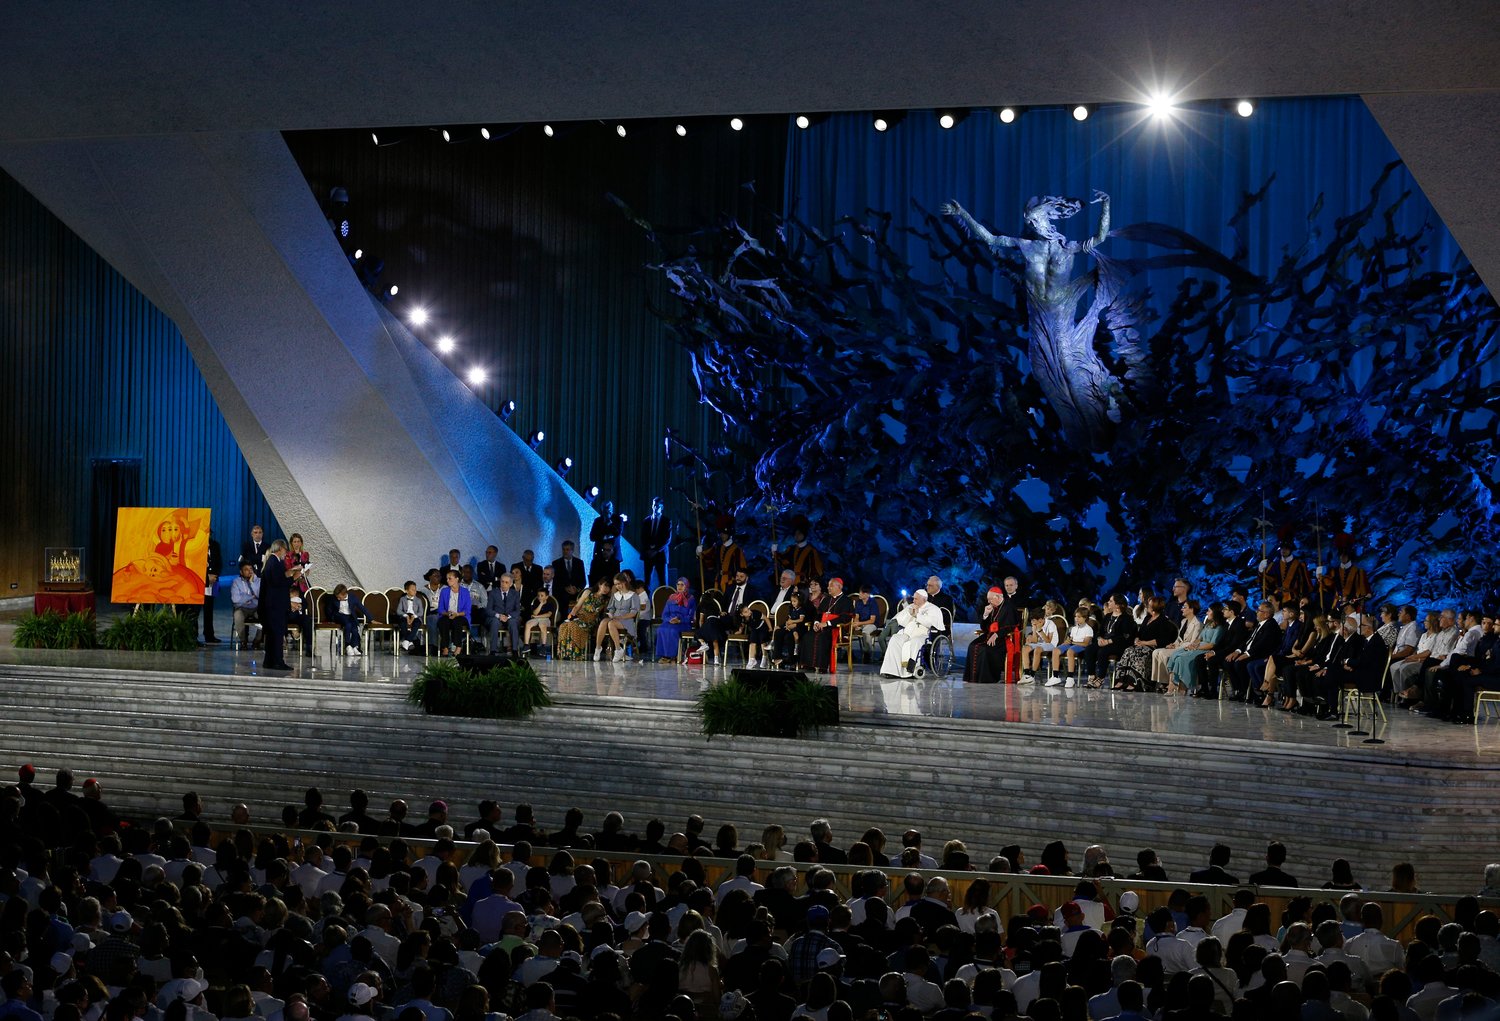 Pope Francis opens the World Meeting of Families in the Paul VI hall at the Vatican June 22. The Festival of Families, an evening of sharing and music, was the opening event of the five-day meeting.